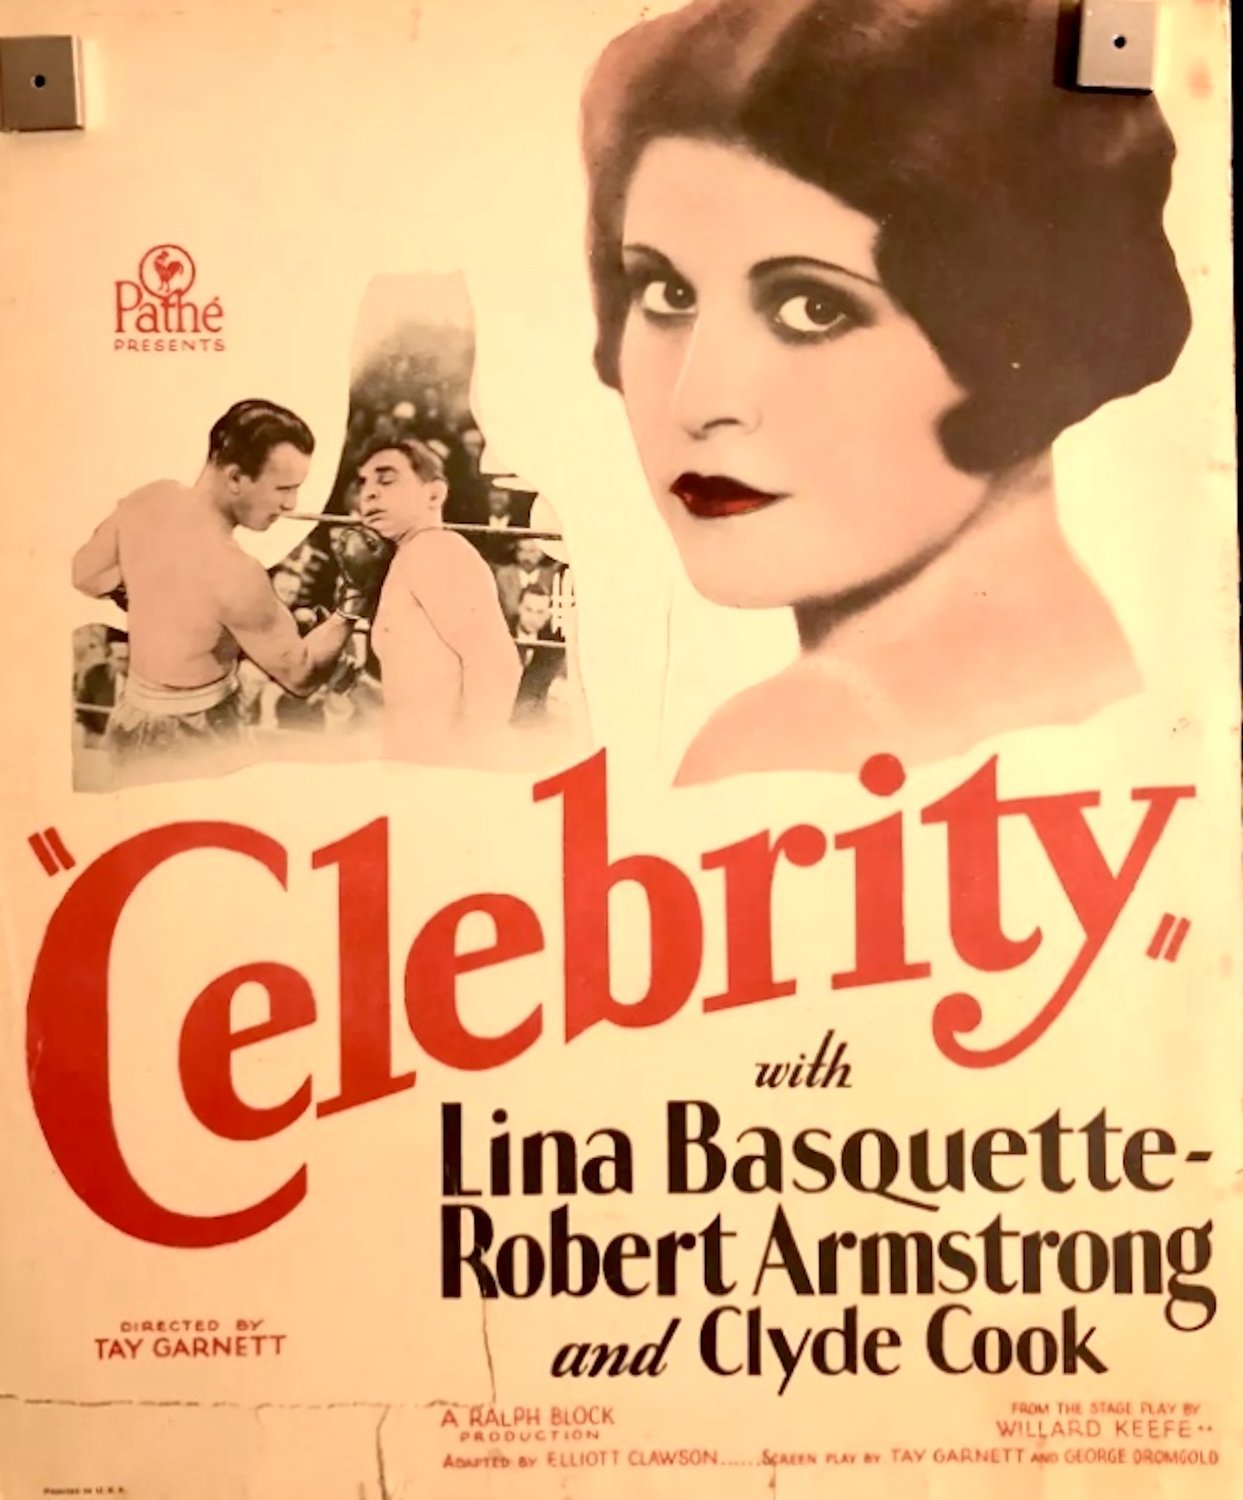 The Capitol will screen “Celebrity” (Pathé, 1928) on Saturday at 12:15 p.m.